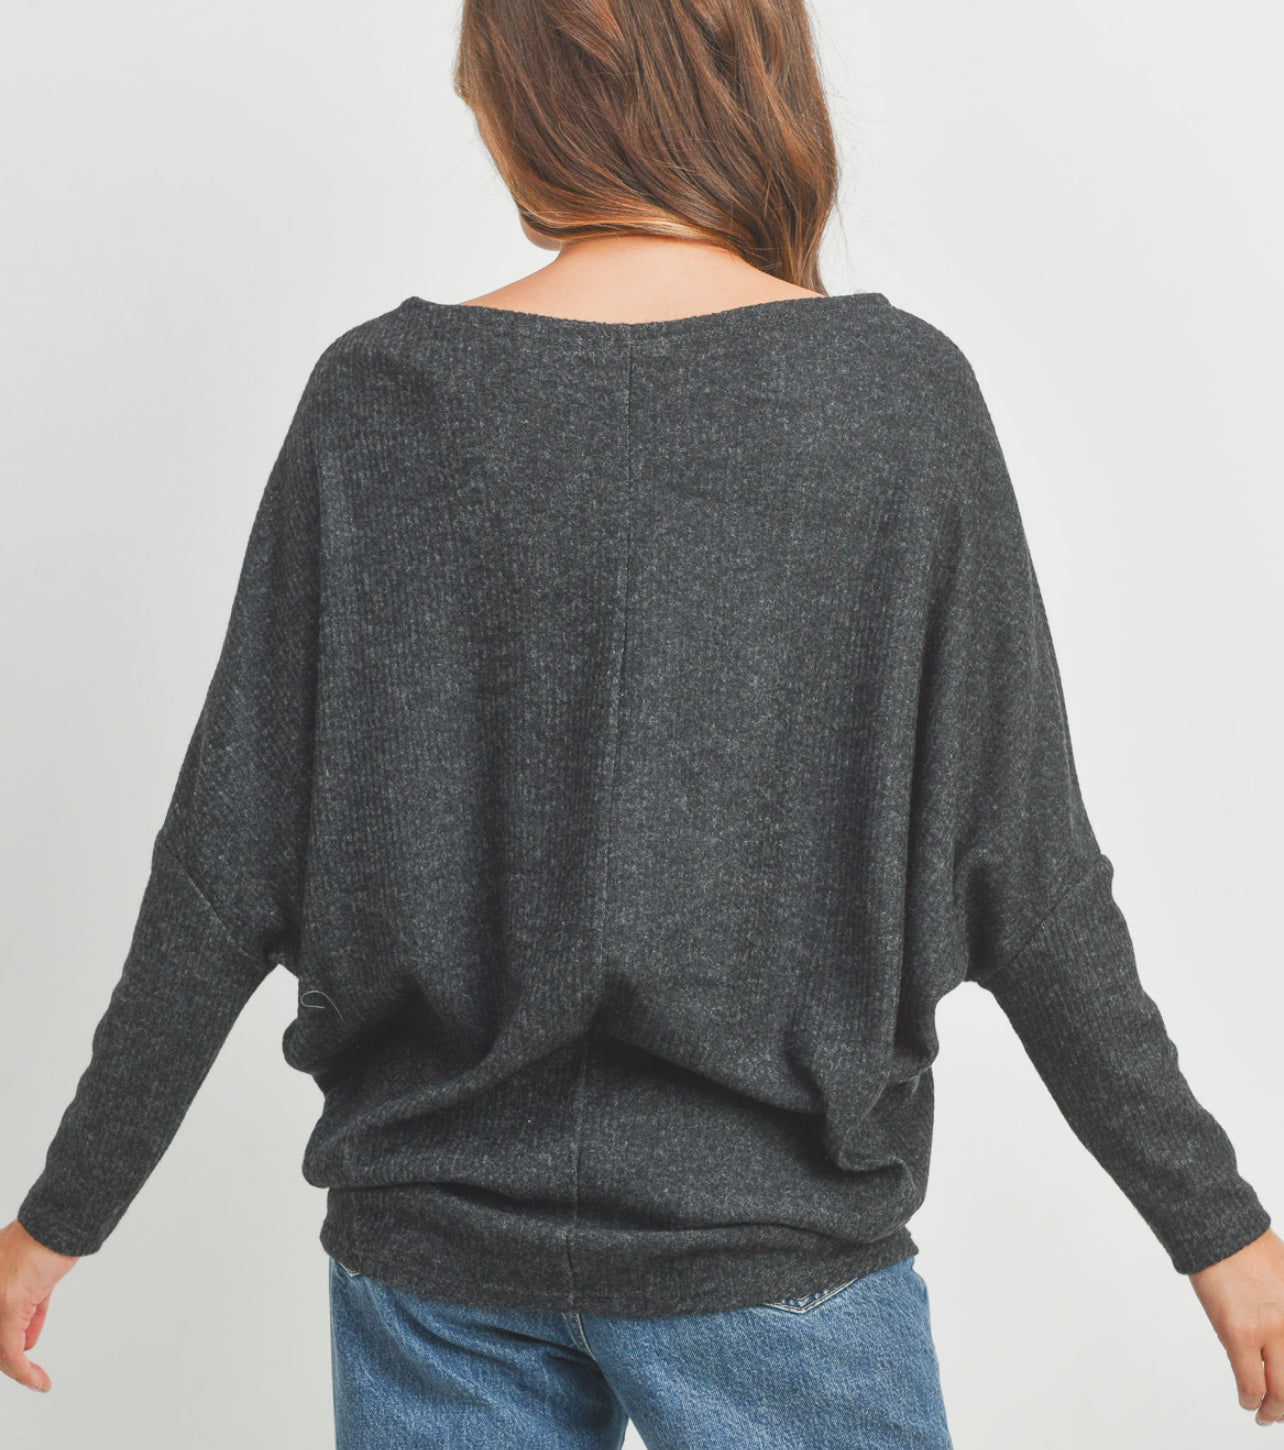 Long Sleeves Brushed Rib High Low Knit Top